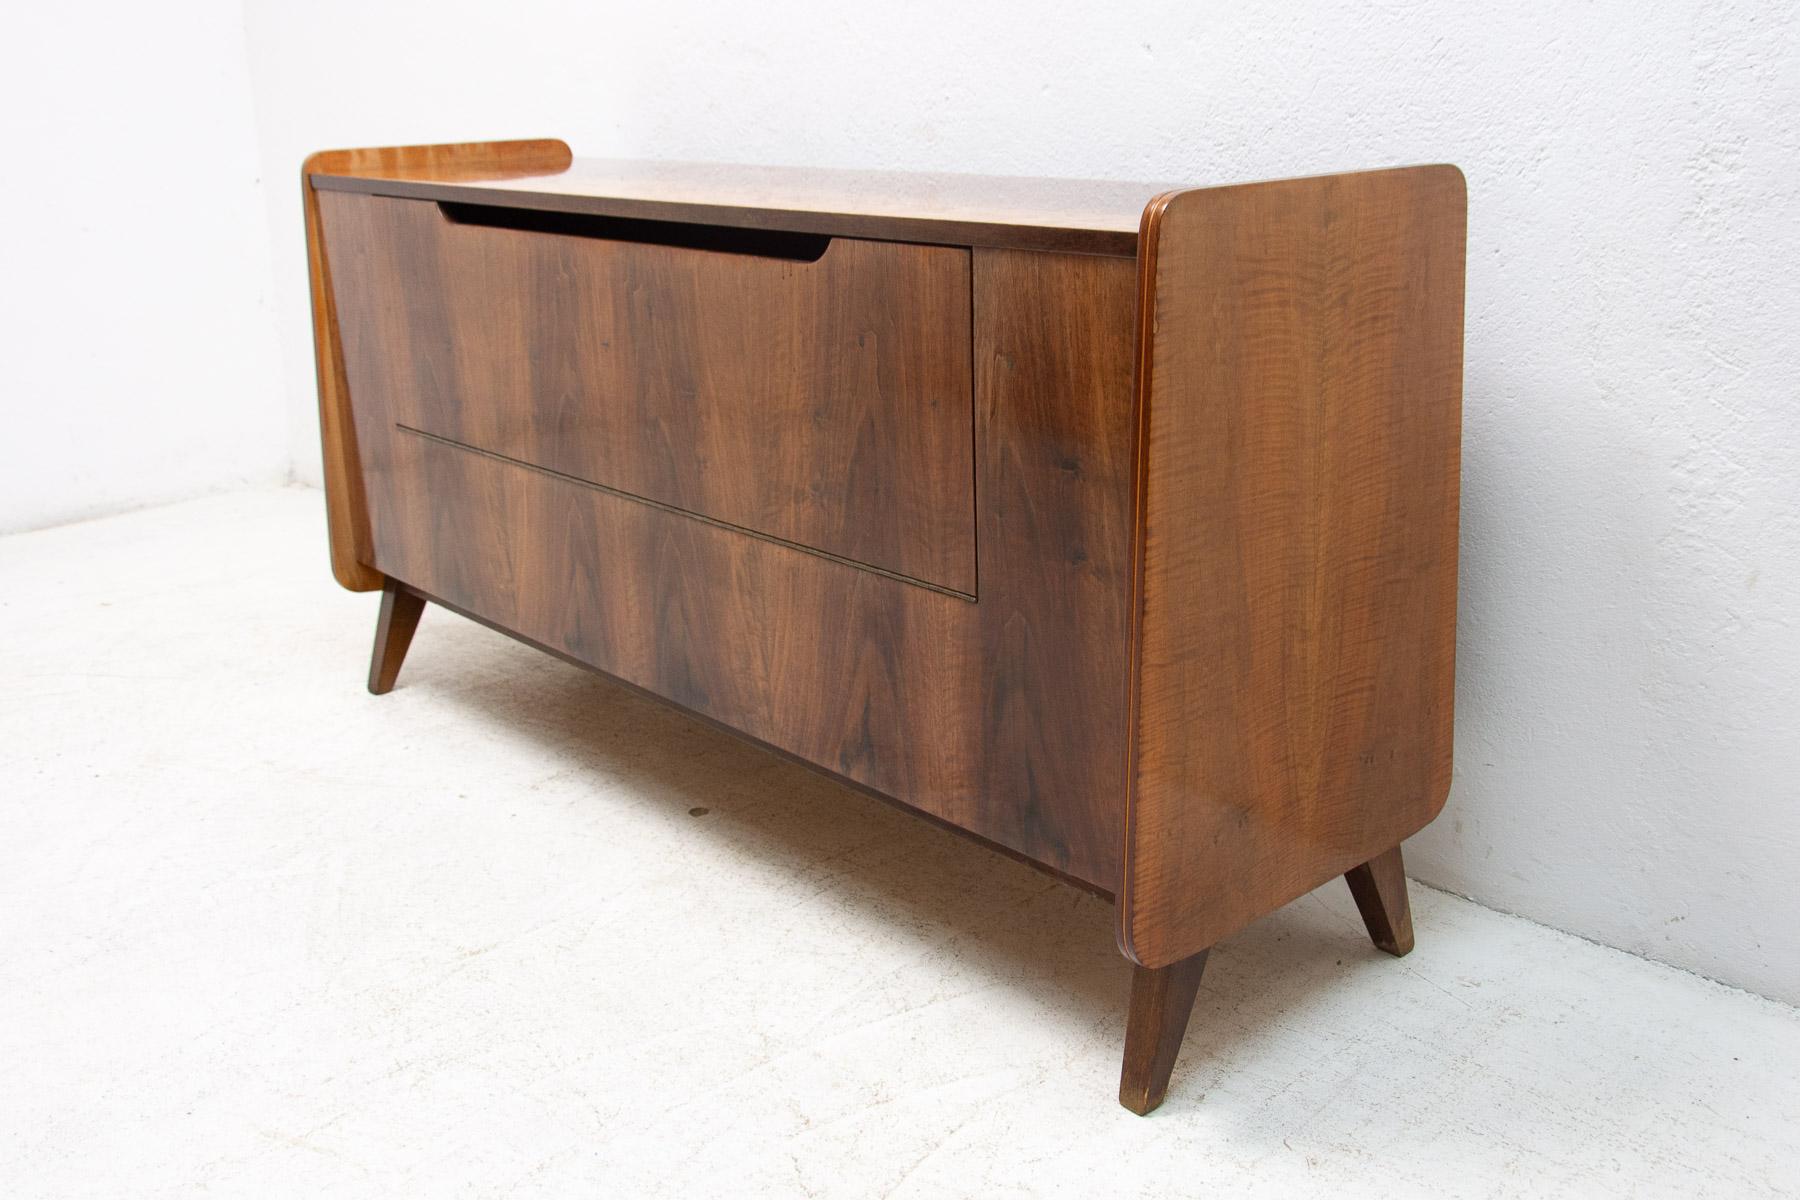 Mid-Century Modern walnut dresser by Frantisek Jirak for Tatra nabytok. Made in the former Czechoslovakia during the 1960´s. The dresser is a part of living set. The furniture is primarily intended as a chest of drawers, but it can also be used as a